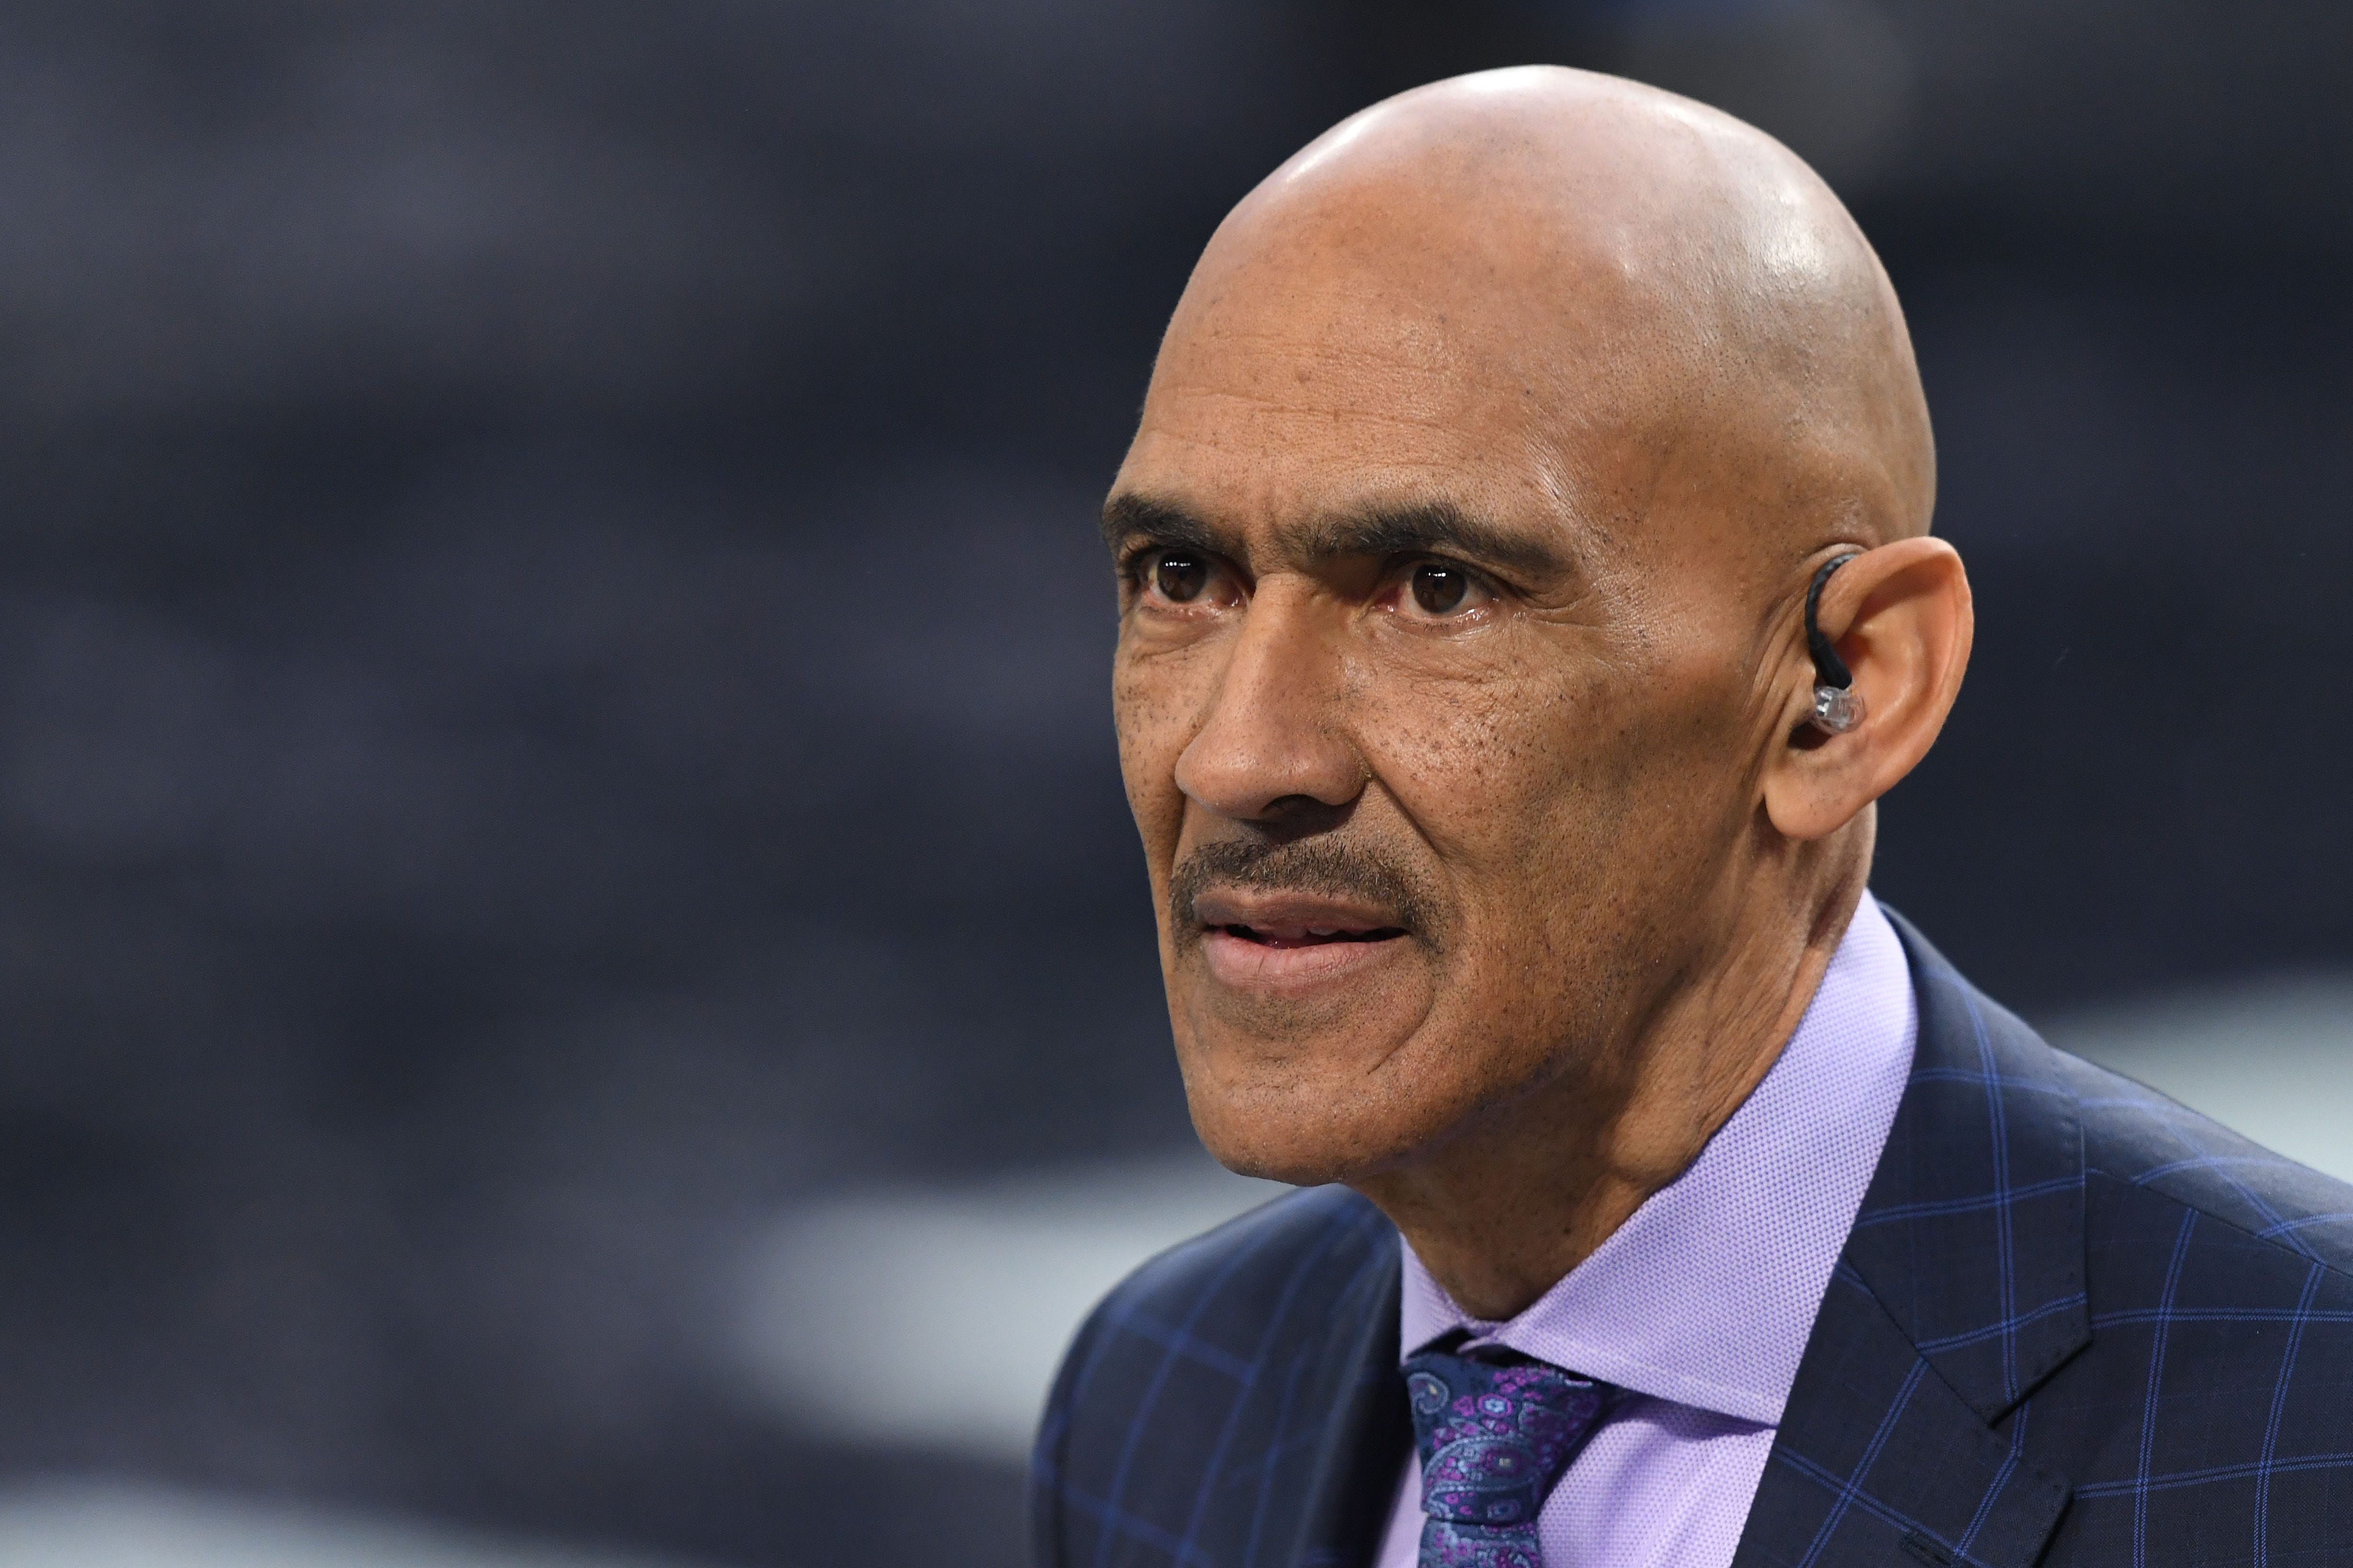 Tony Dungy deletes tweet sharing debunked story about schools putting litter boxes in bathrooms